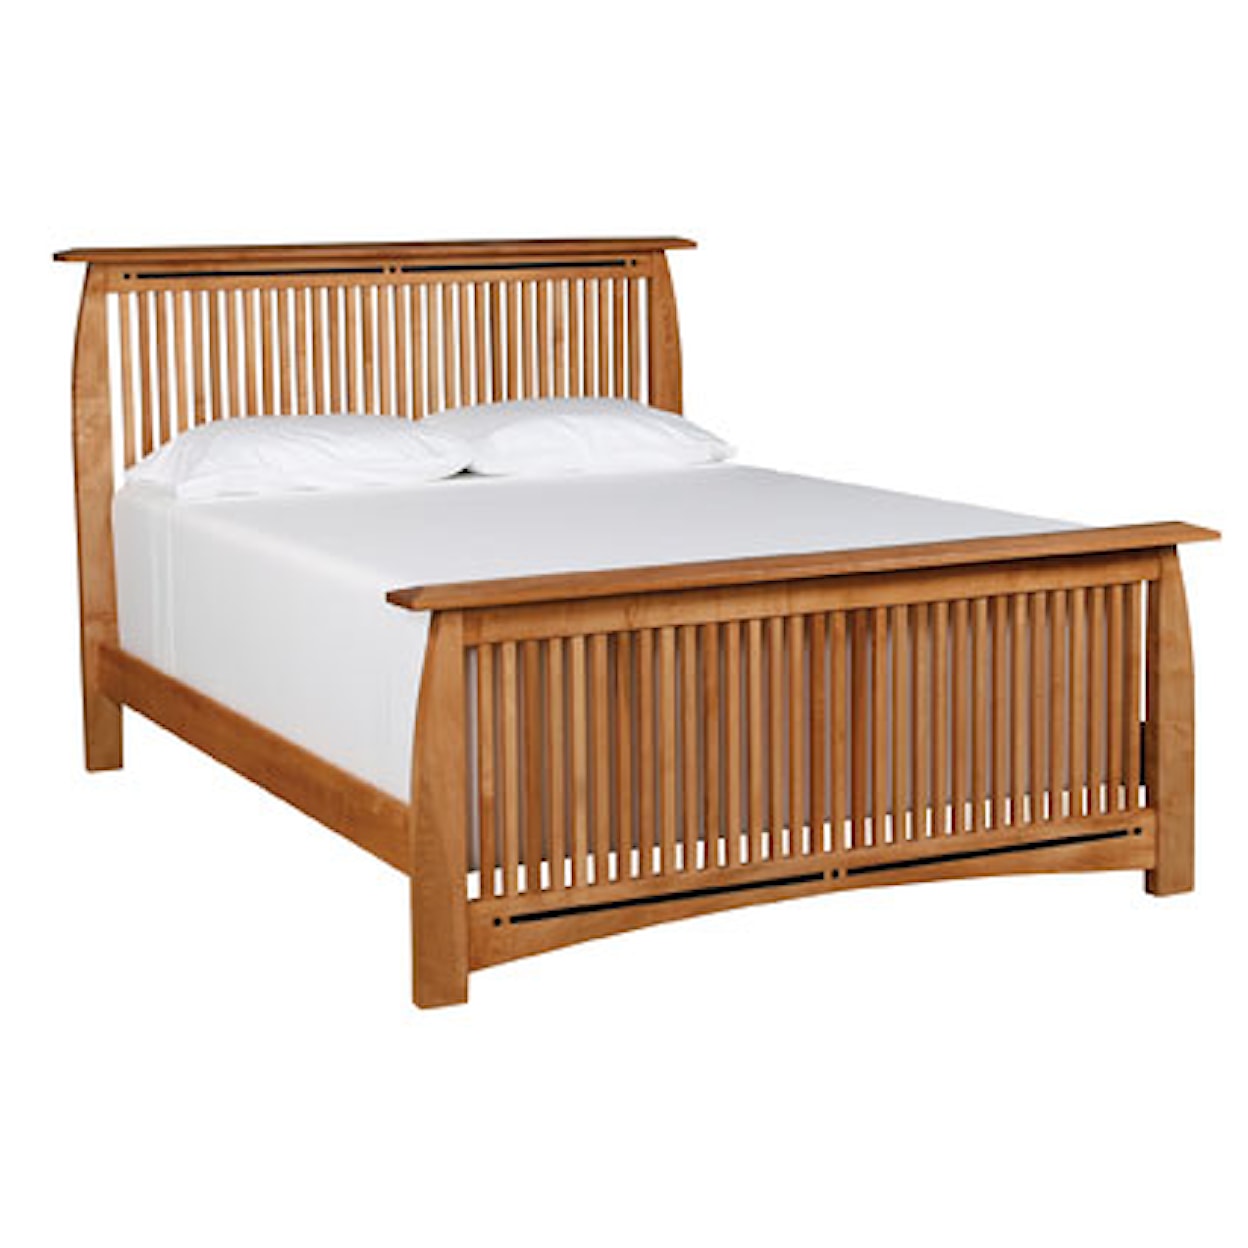 Simply Amish Aspen California King Spindle Bed